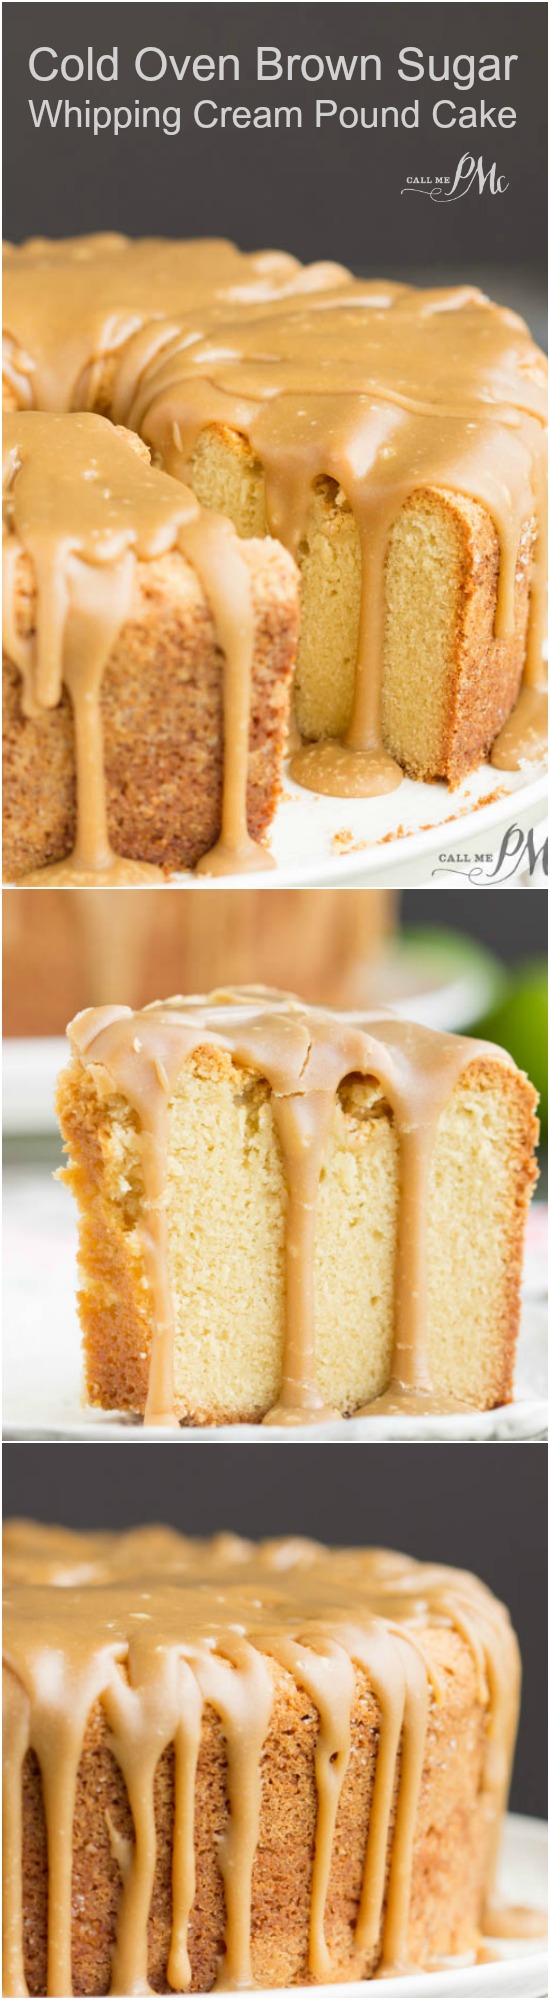 Cold Oven Brown Sugar Whipping Cream Pound Cake i 